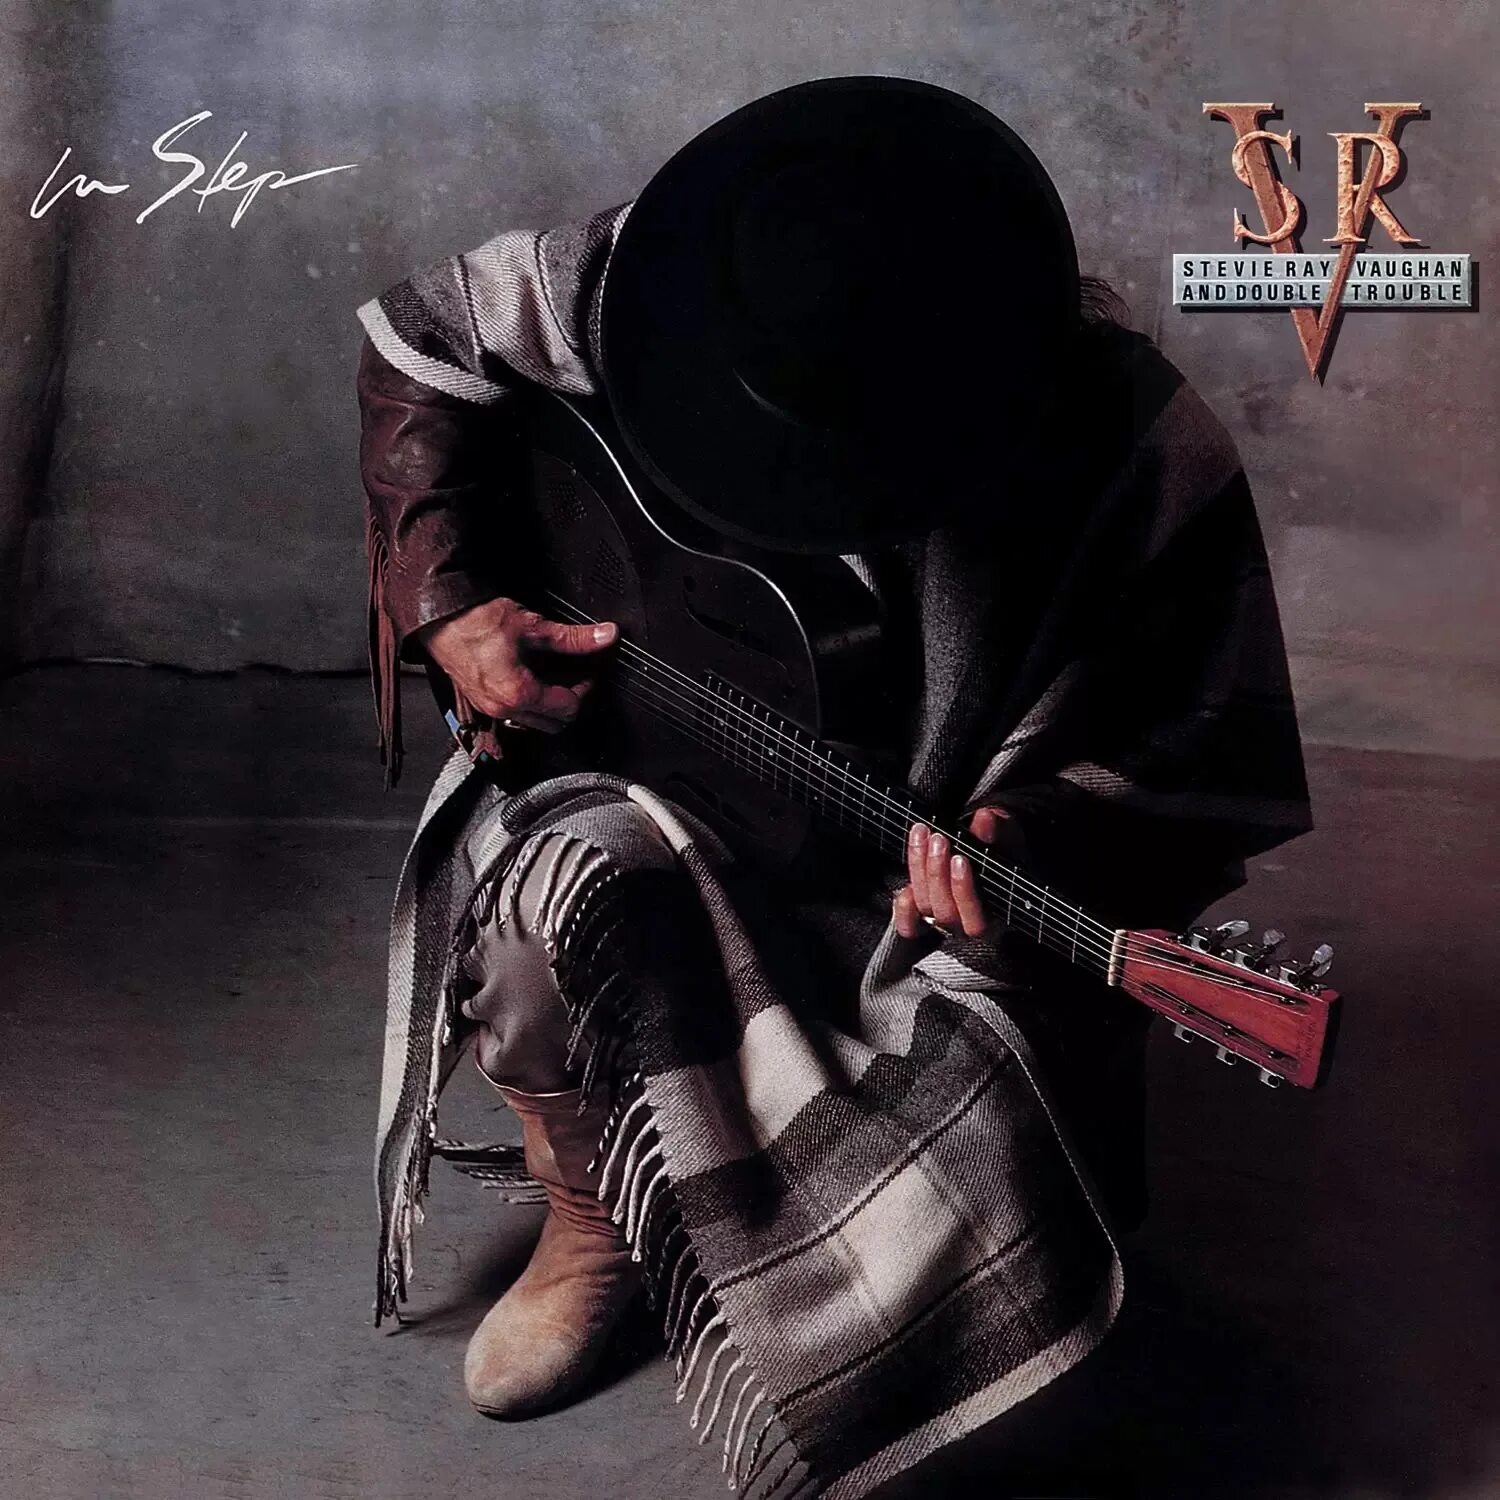 Couldn t stand. Stevie ray Vaughan in Step 1989. Vaughan Stevie ray "in Step". Stevie ray Vaughan and Double Trouble - in Step. Stevie ray Vaughan и Double Trouble арт.